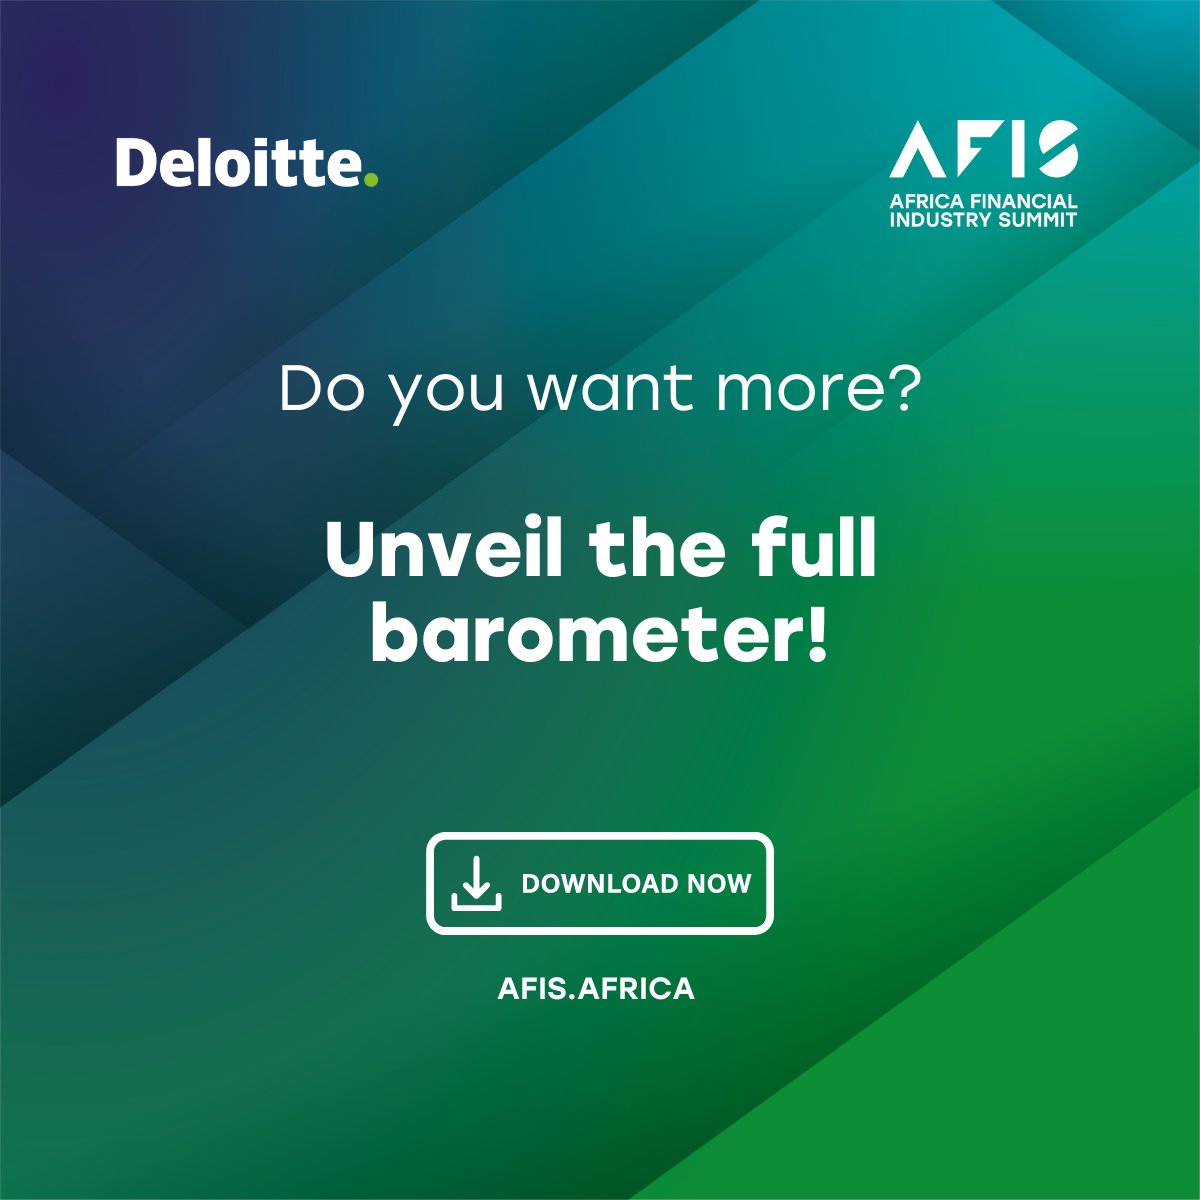 Embark on a journey of insight and discover comprehensive analyses that delineate the contours of #AfricanFinance. From commitment to impact, each page is a testament to the sector's tenacity and potential.

📈 𝗨𝗻𝗹𝗼𝗰𝗸 𝘁𝗵𝗲 𝗙𝘂𝗹𝗹 𝗥𝗲𝗽𝗼𝗿𝘁: lnkd.in/dDGJnCb8